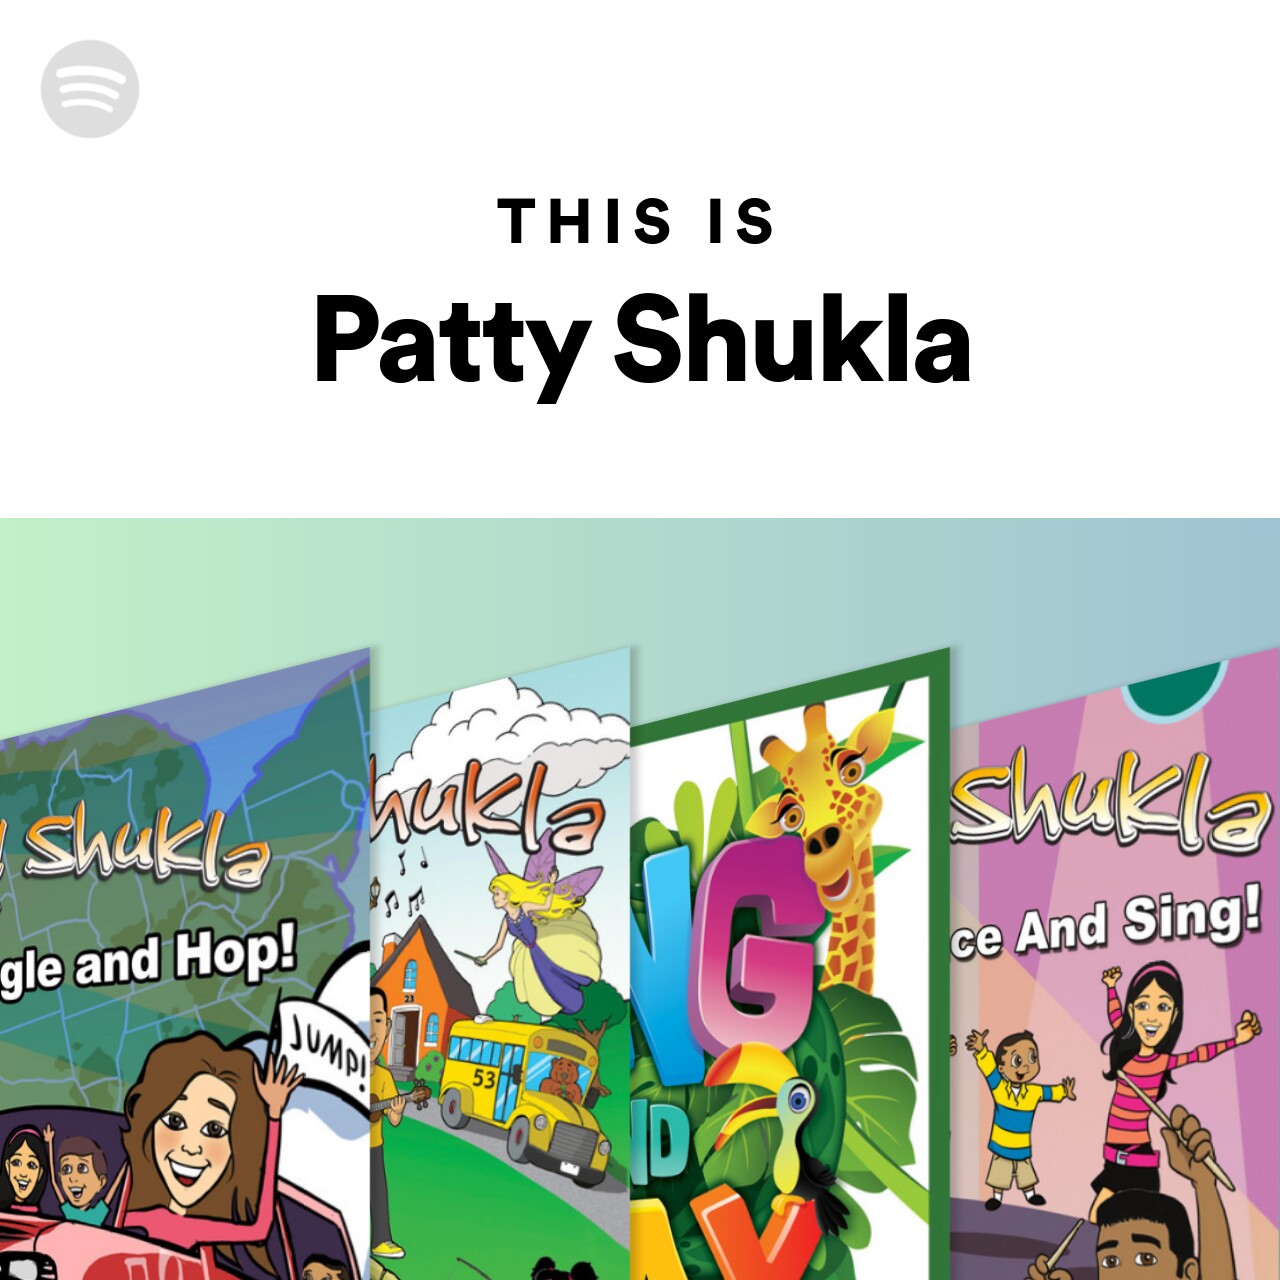 Spotify Playlist This Is Patty Shukla on 